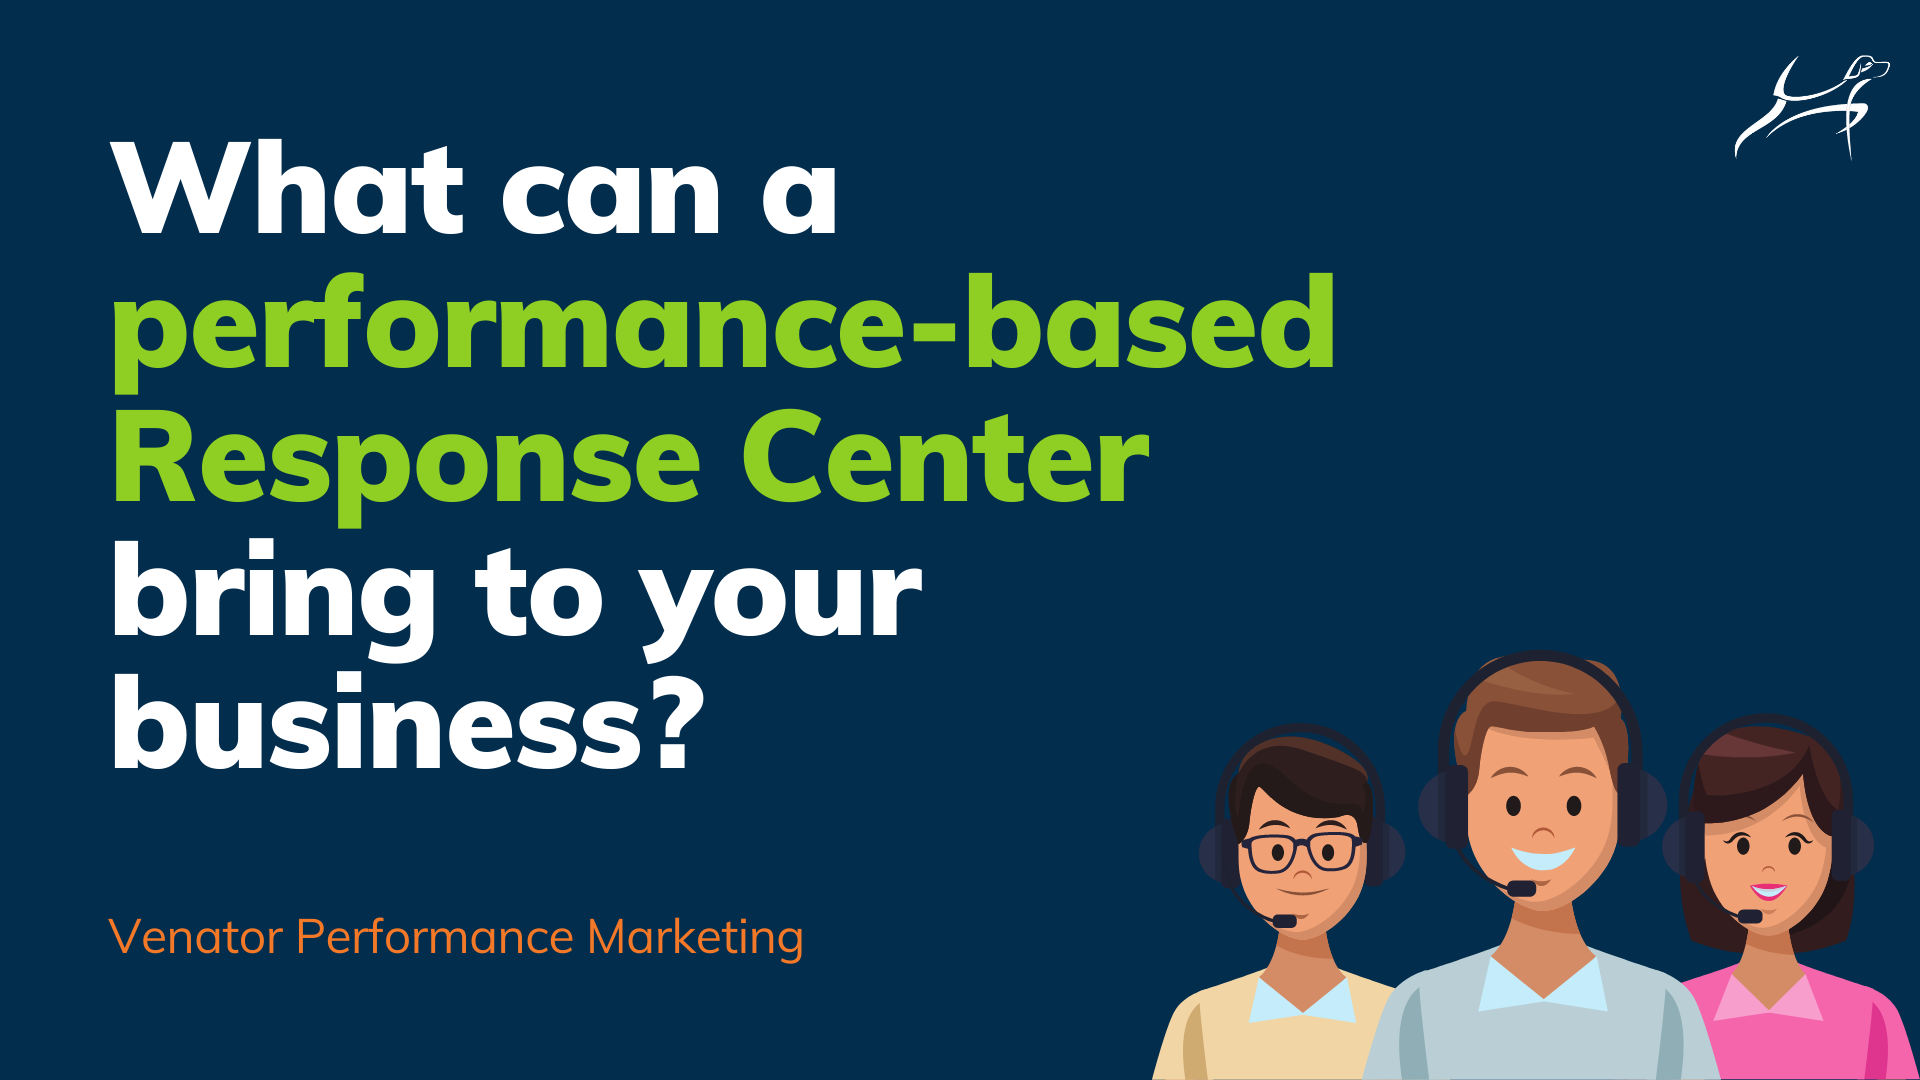 What can a performance-based response team bring to your business?